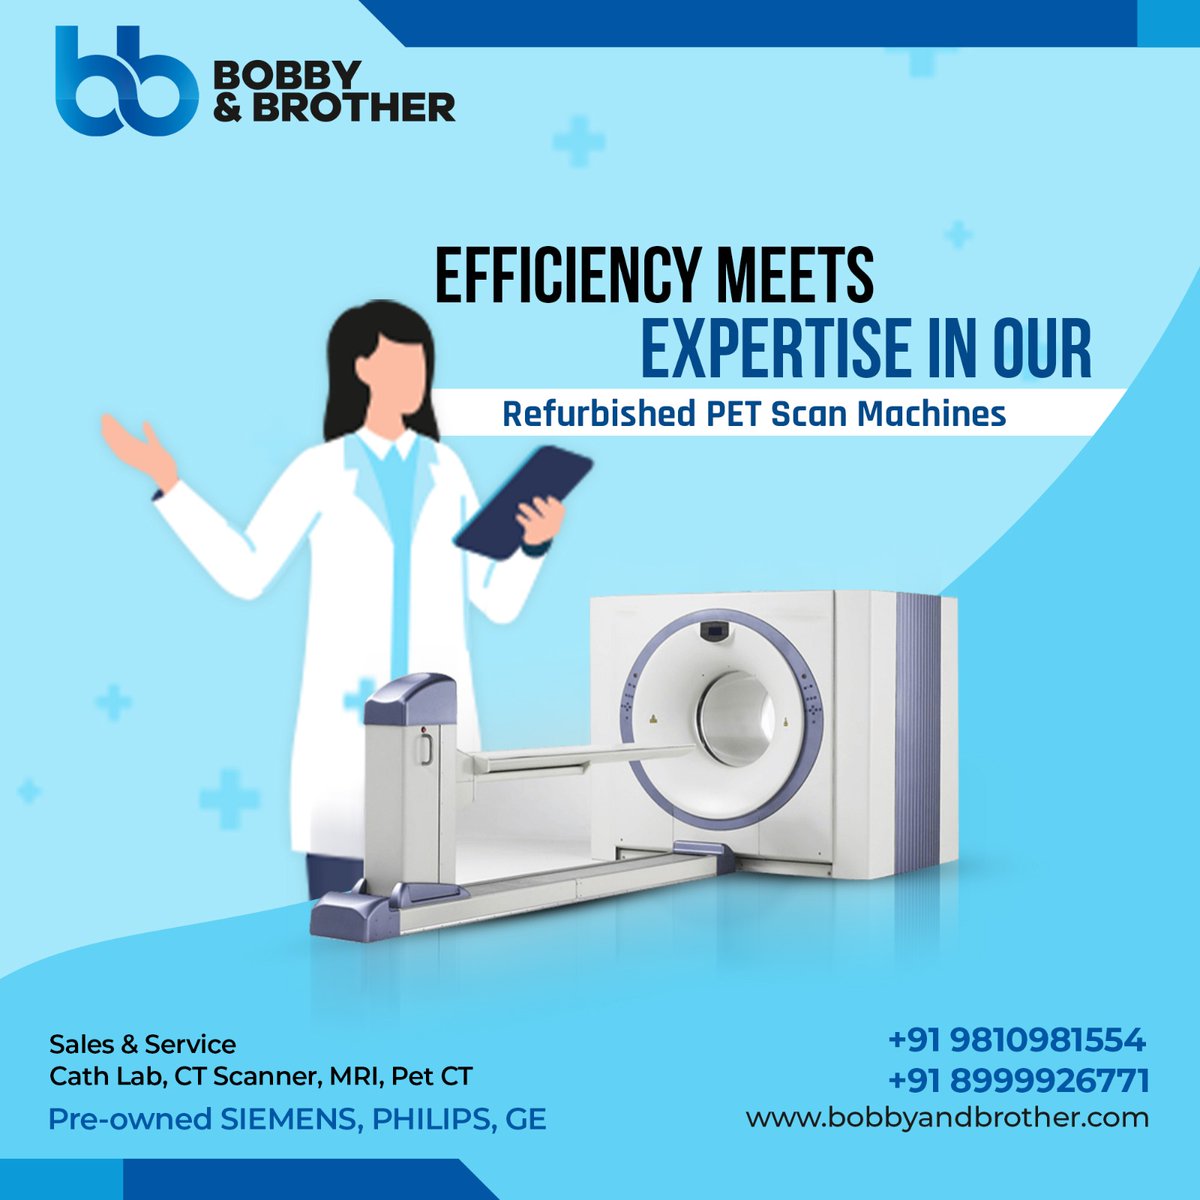 Get precise imaging with our refurbished PET scan machines—reliable and cost-effective solutions for advanced diagnostics.

#BobbyAndBrother #RefurbishedEquipment #PetScn #medicalequipment #MedicalEquipmentForSale #MedicalIndustry #Diagnostics #MedicalImaging #India